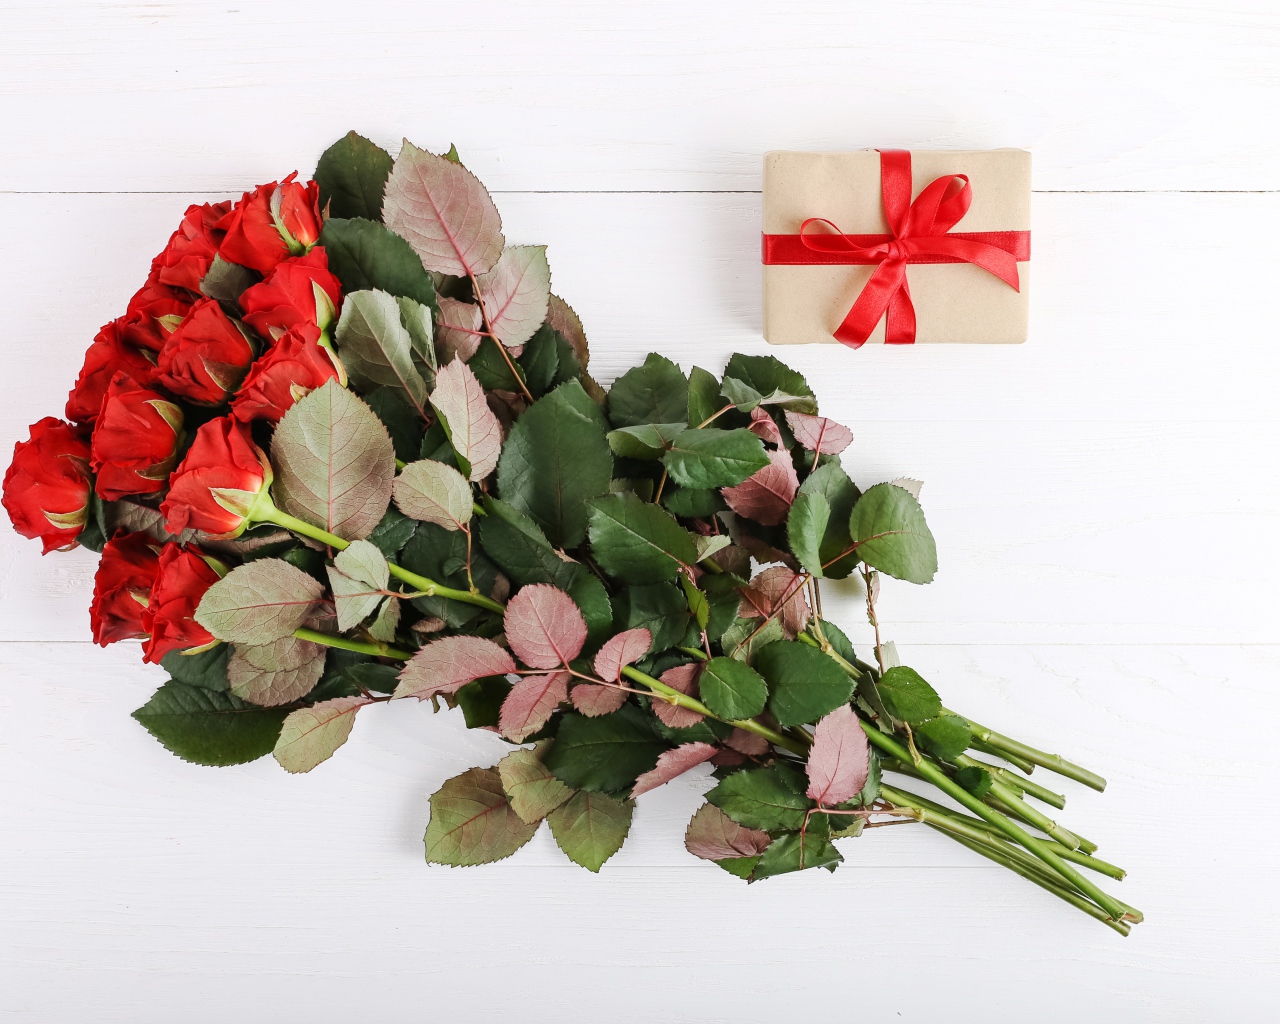 Bouquet of prickly red roses with a gift on a white background